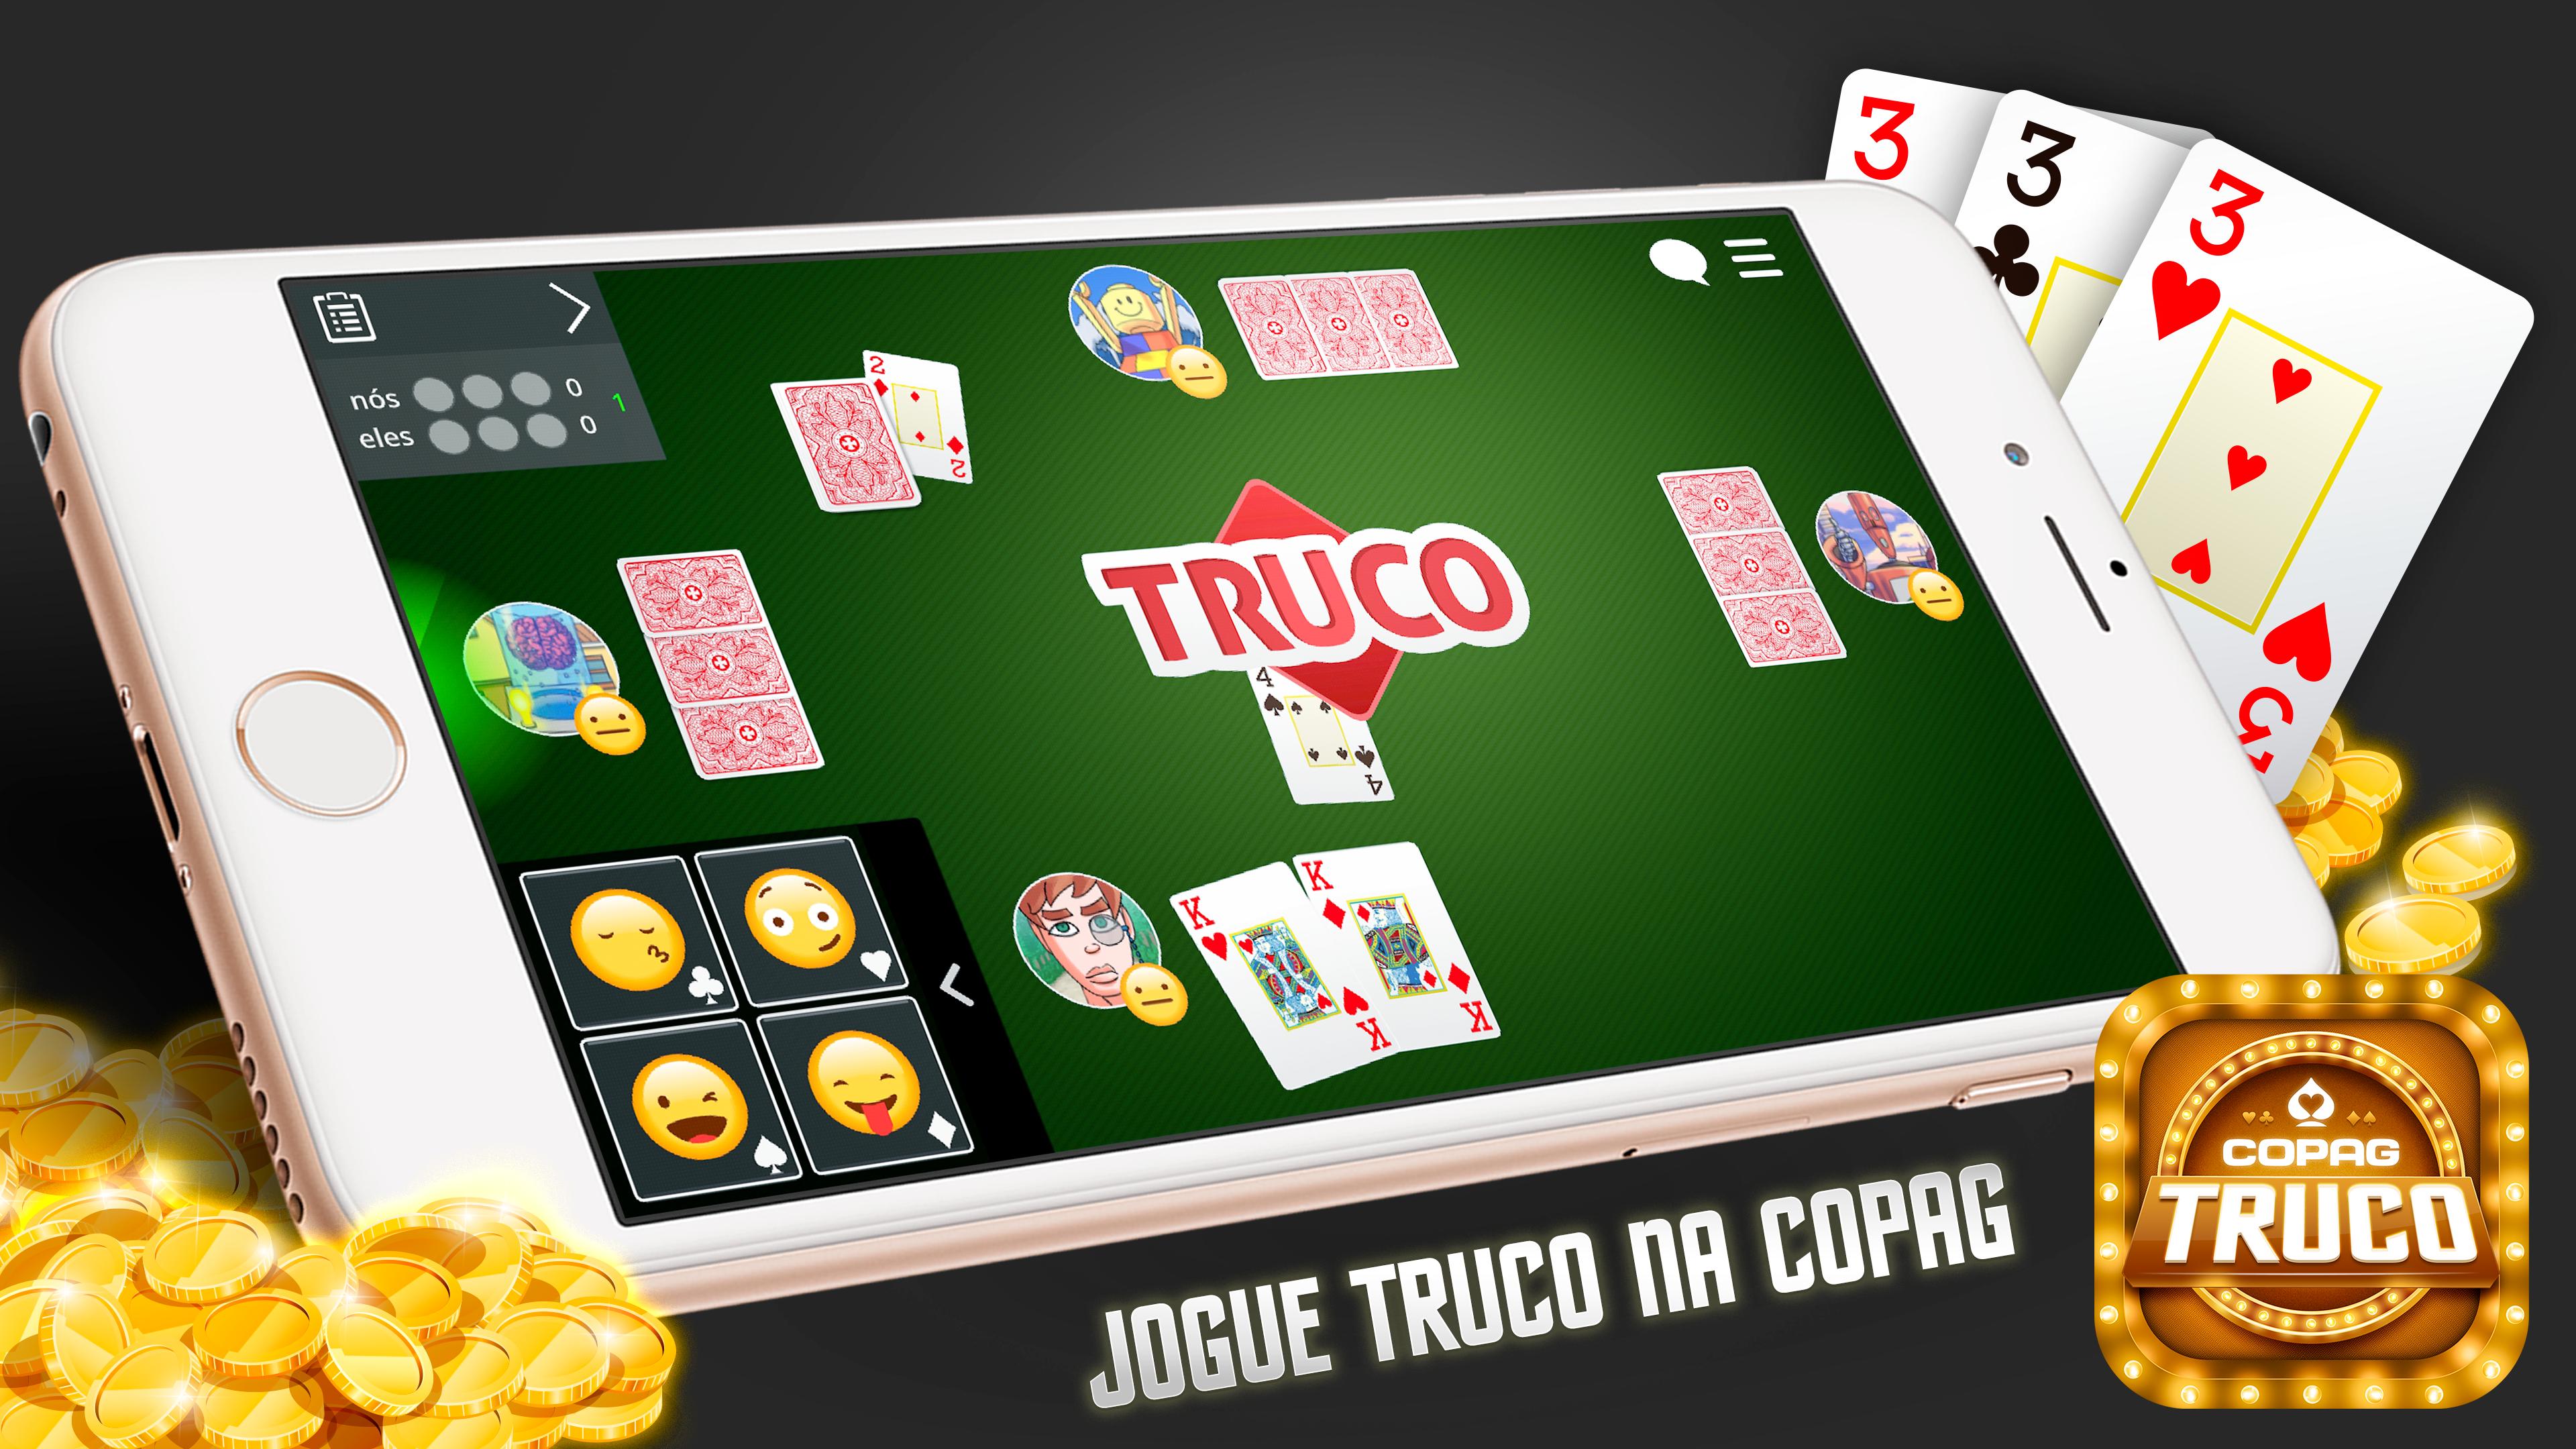 Truco Pocket - Truco Online for iPhone - Free App Download